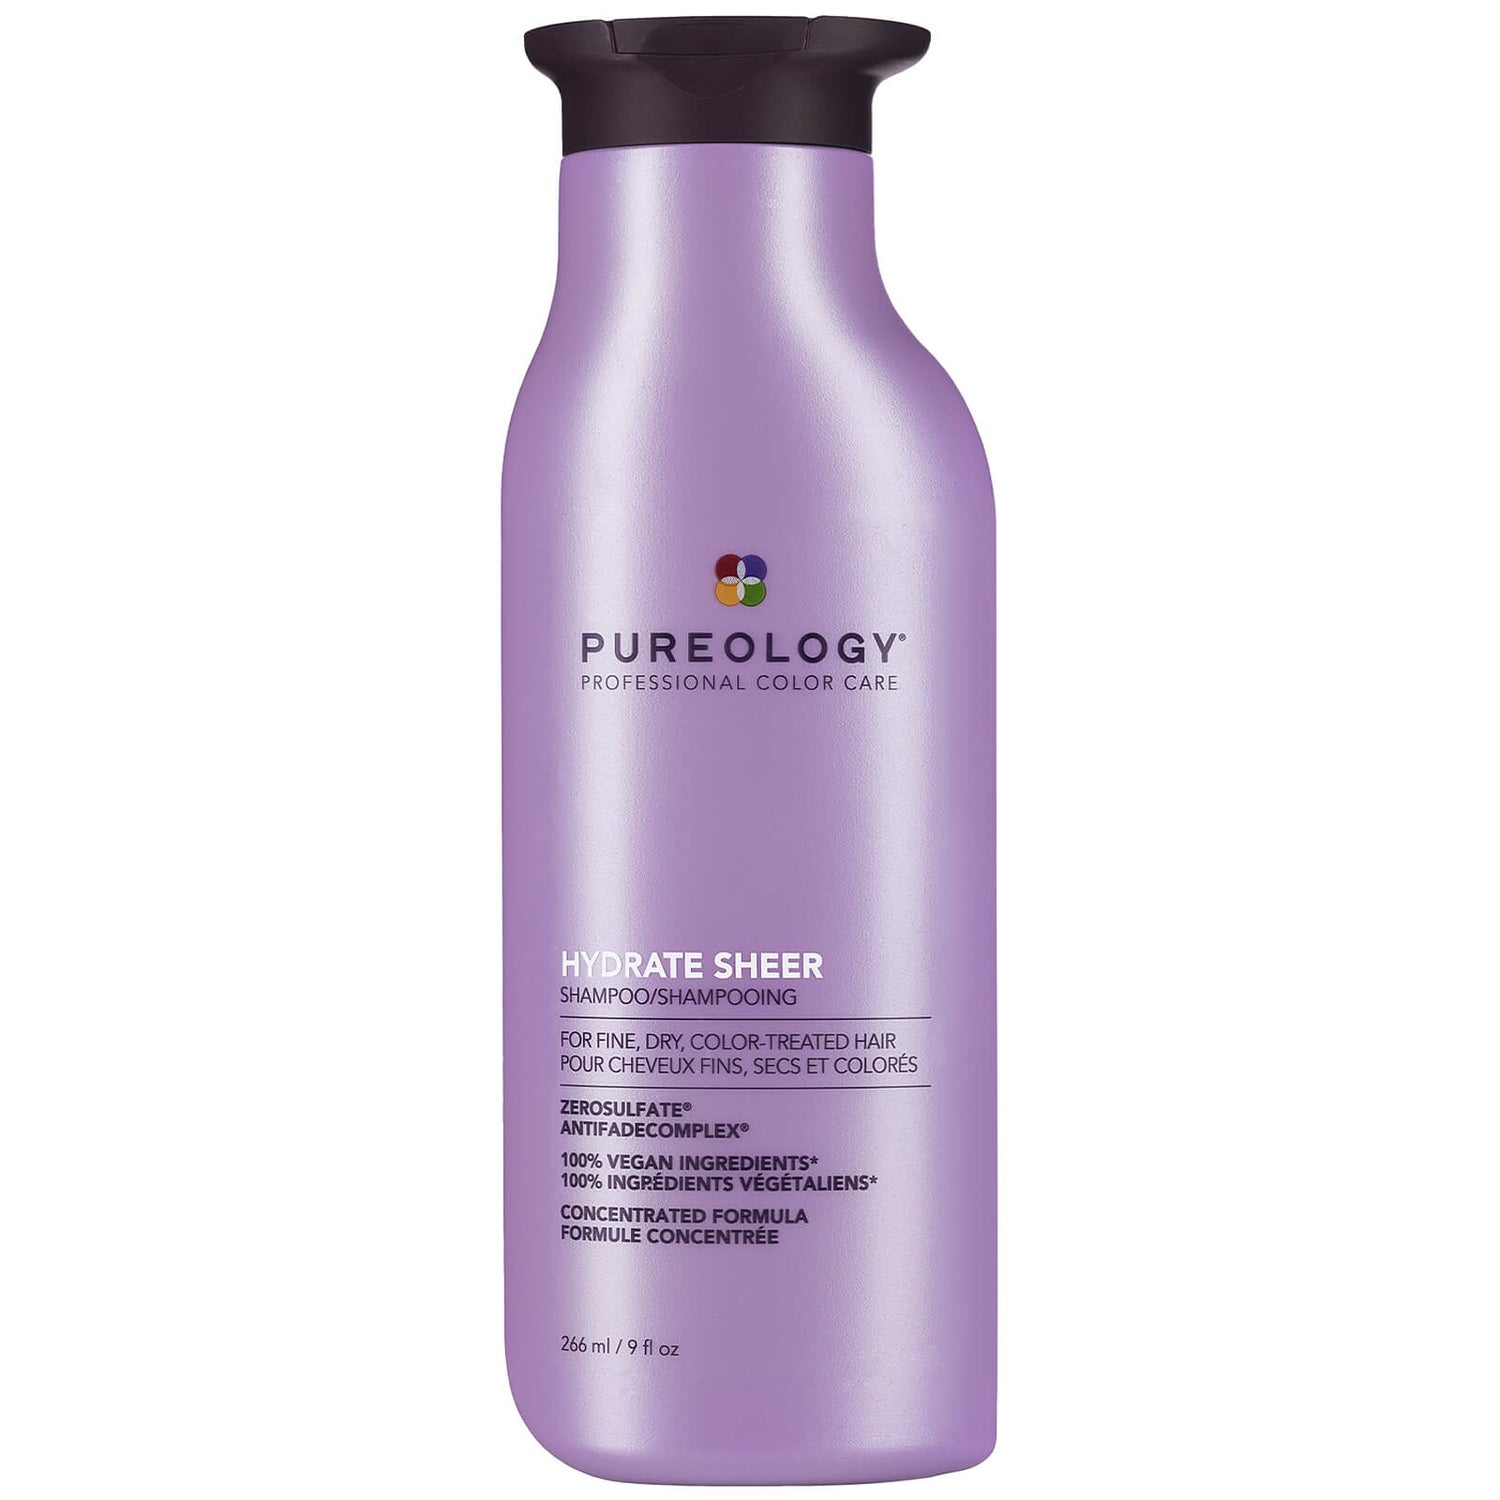 Pureology Sulphate Free Hydrate Sheer Shampoo for a Gentle Cleanse for Fine, Dry Hair 266ml